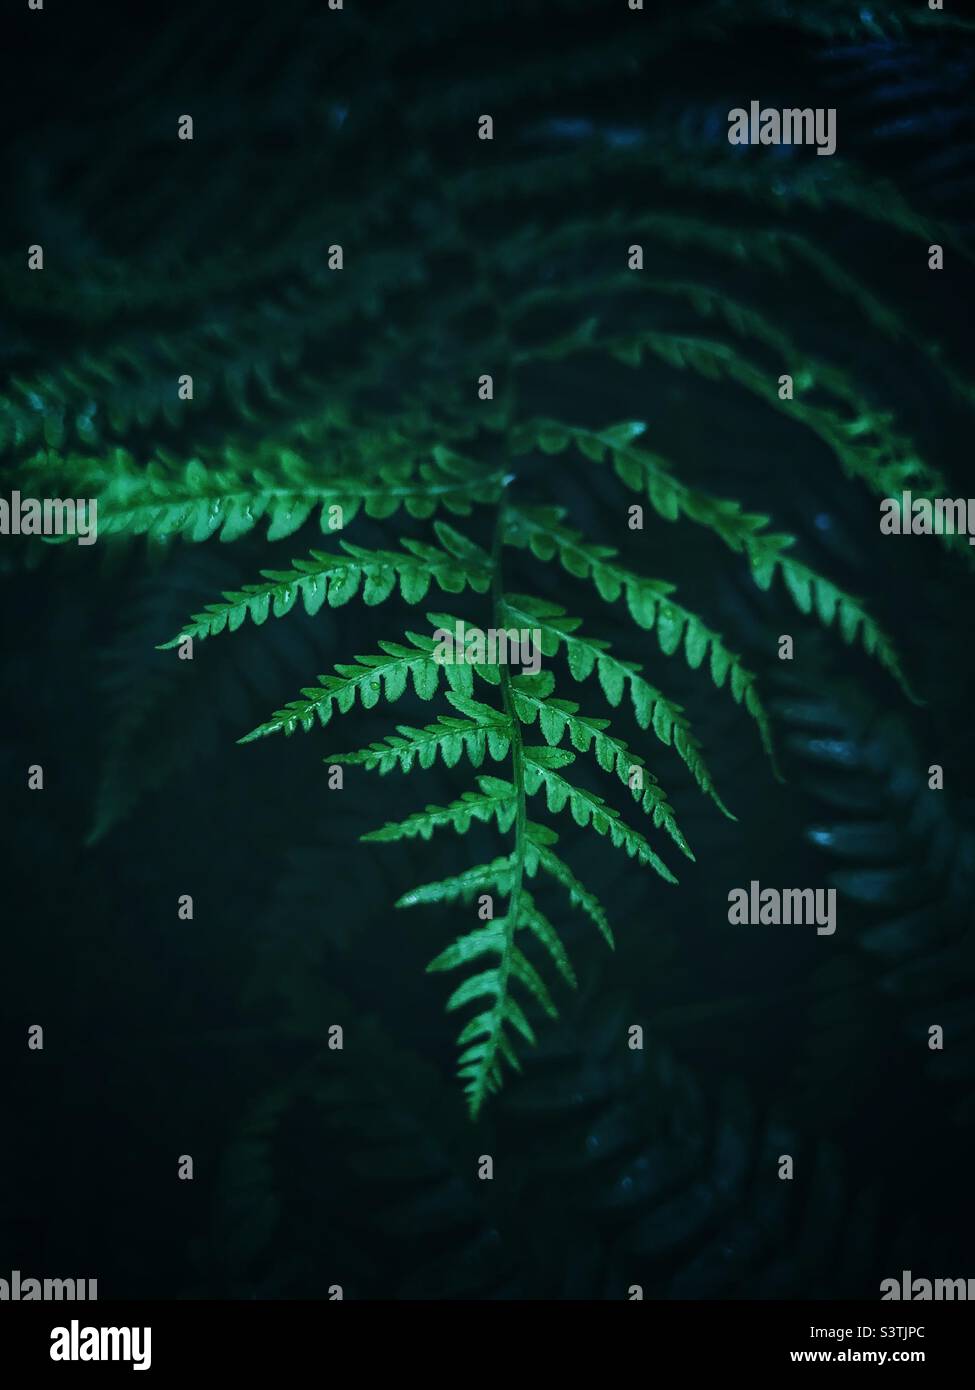 A lush green fern leaf with fronds in a dark forest nature background and new beginnings or new life concept Stock Photo